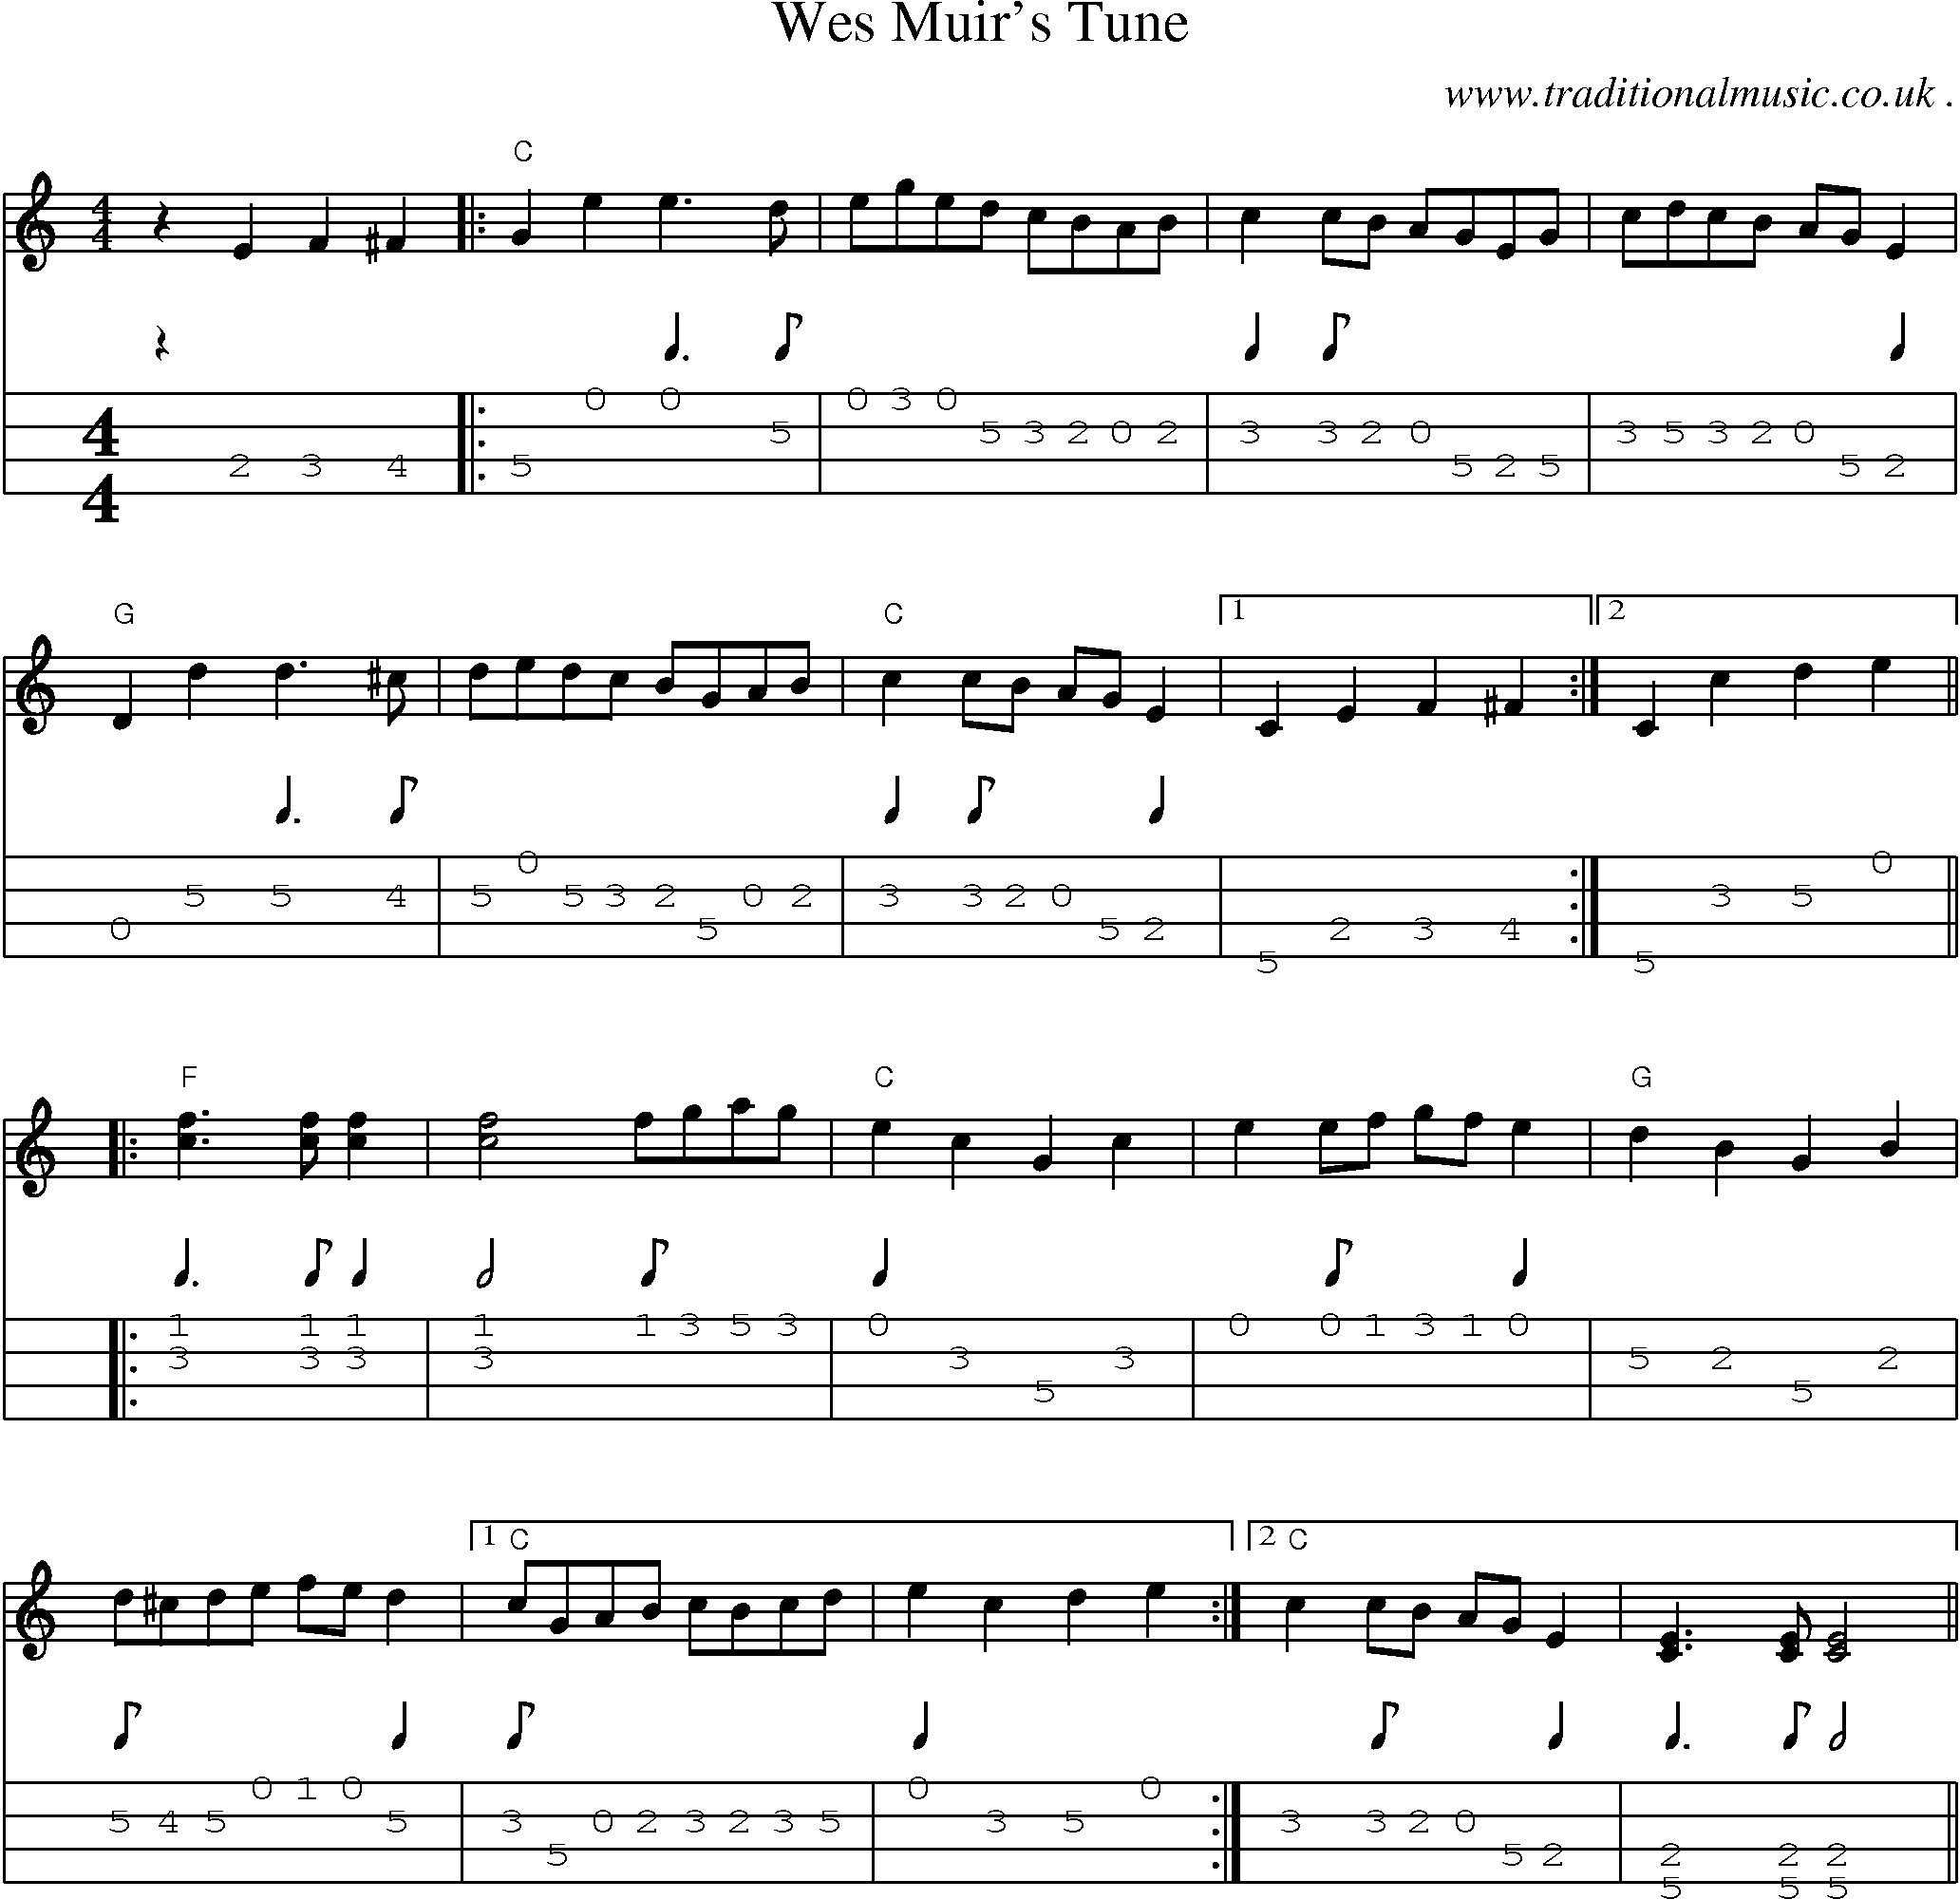 Music Score and Guitar Tabs for Wes Muirs Tune